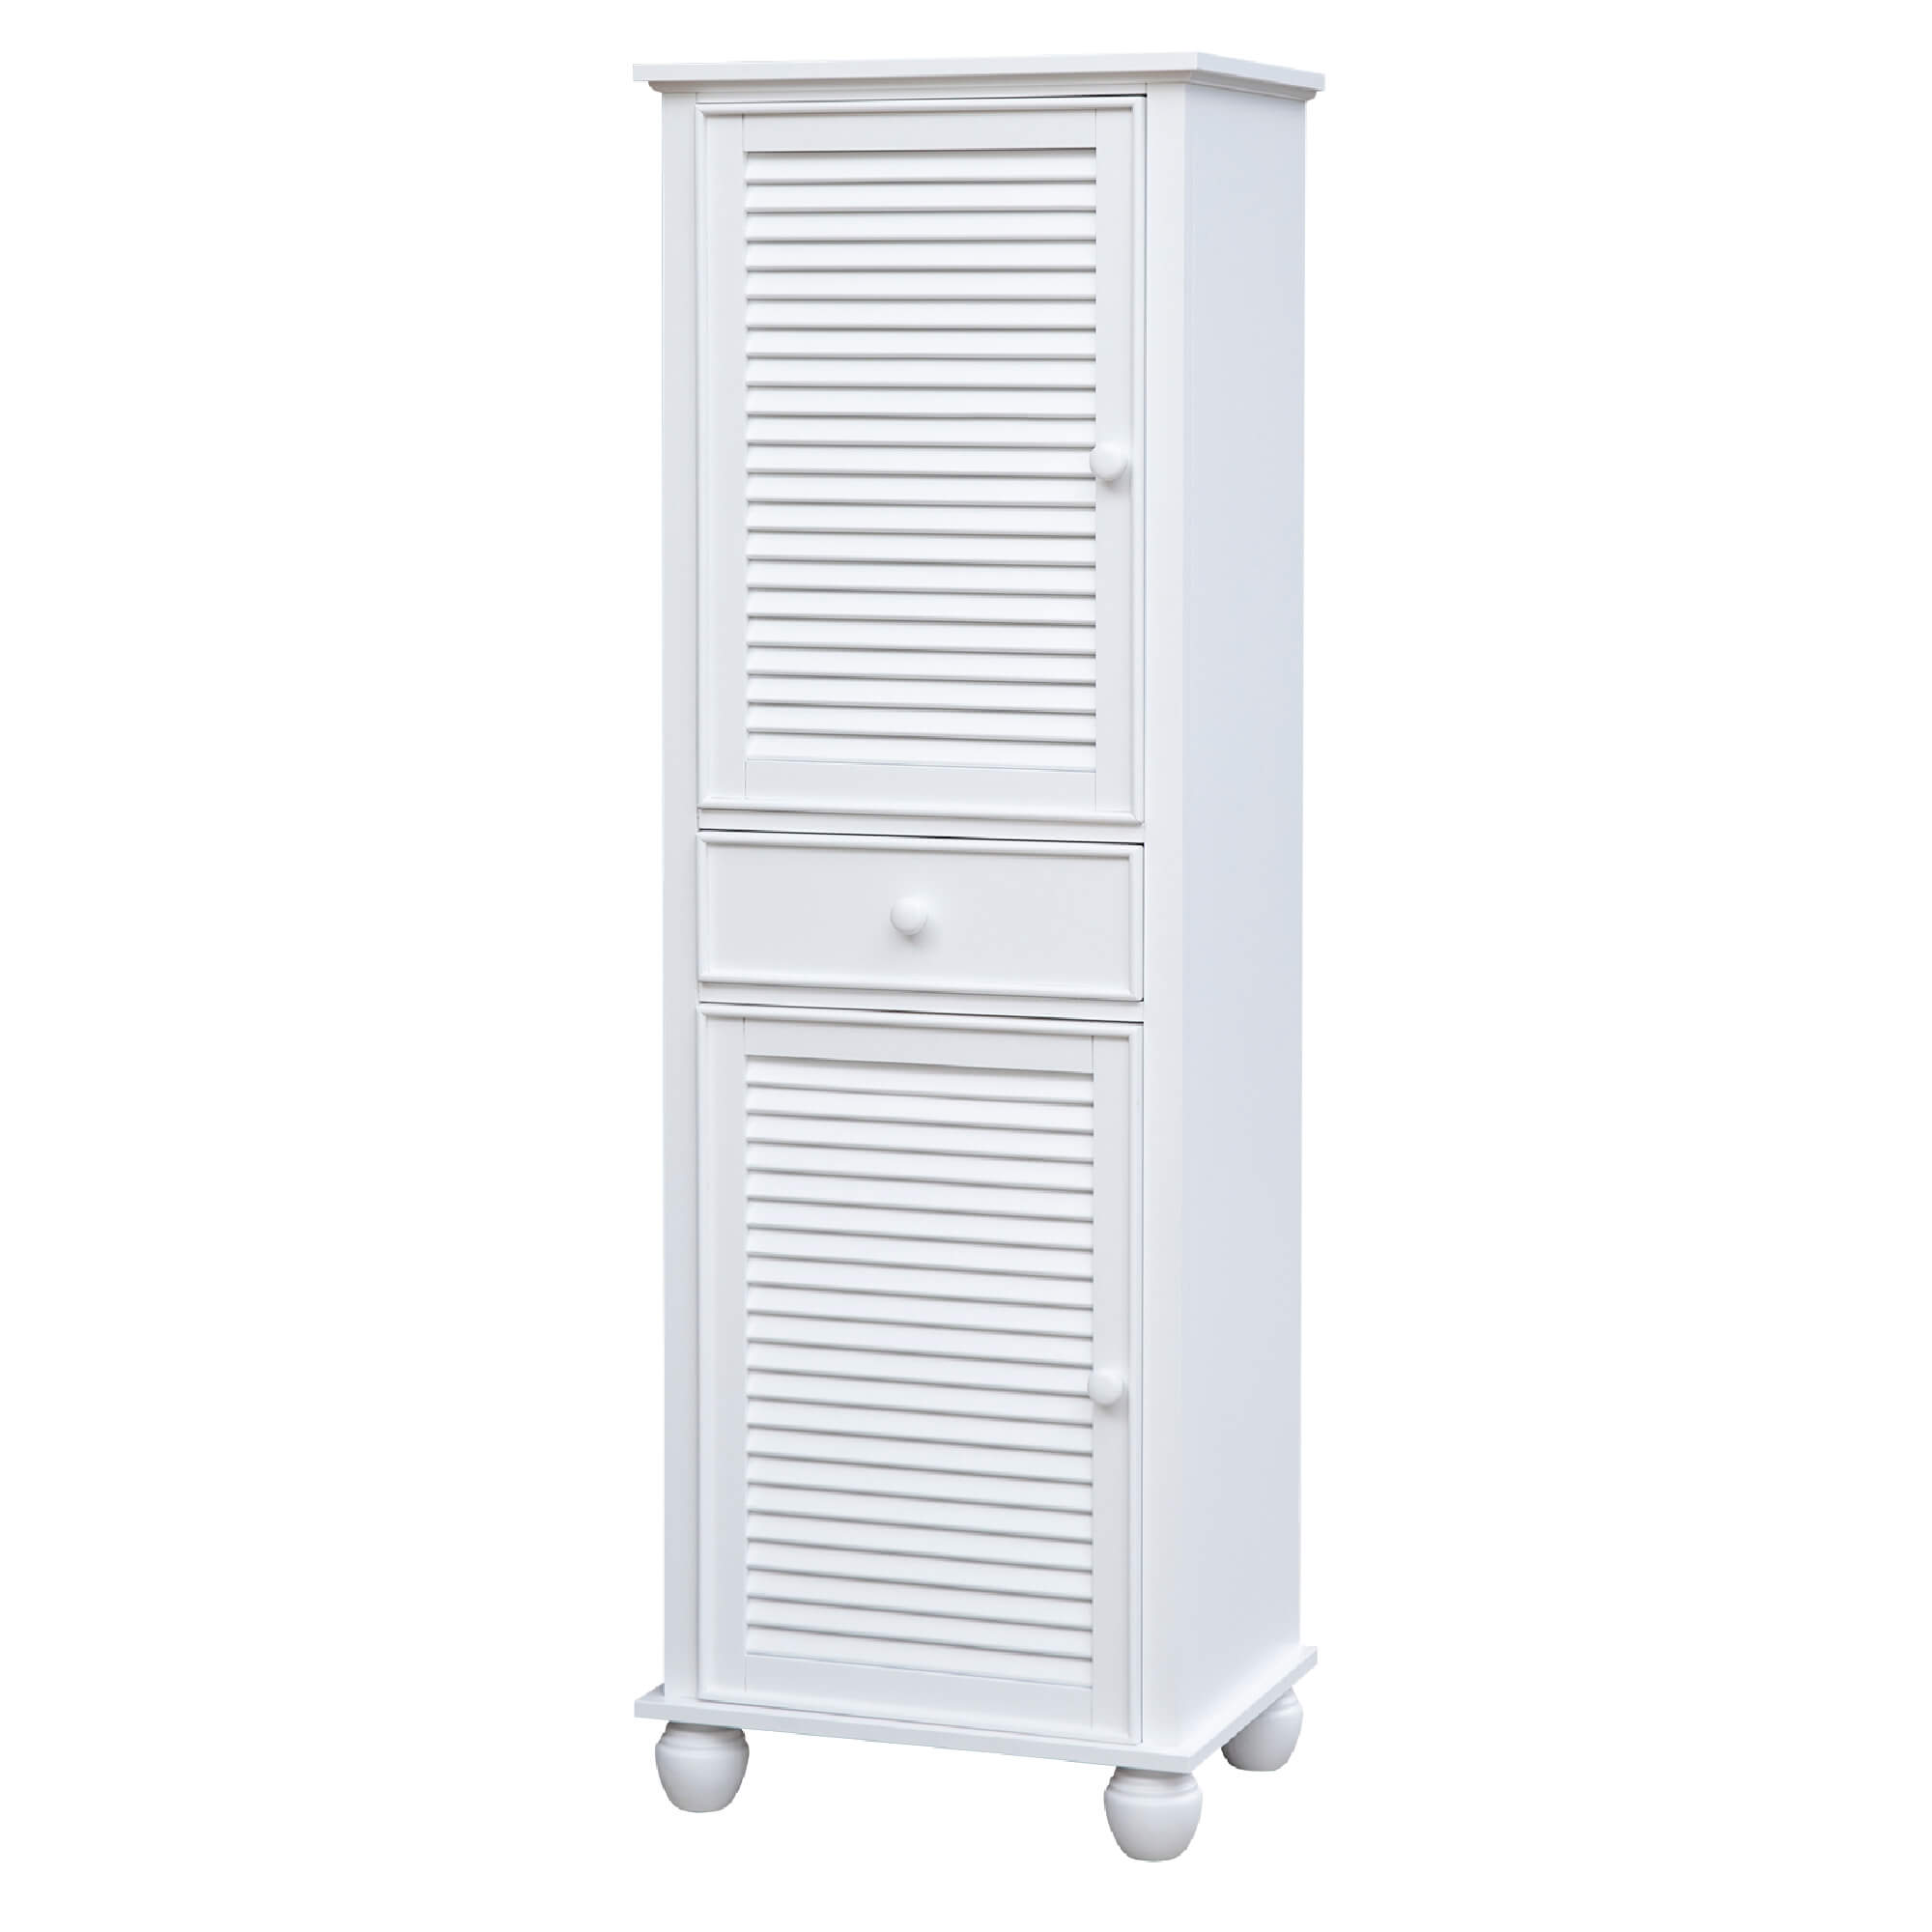 https://www.sunsettrading.com/wp-content/uploads/2020/01/Tall-Cabinet-with-Drawers-three-quarter-view-CF-1145-0150.jpg